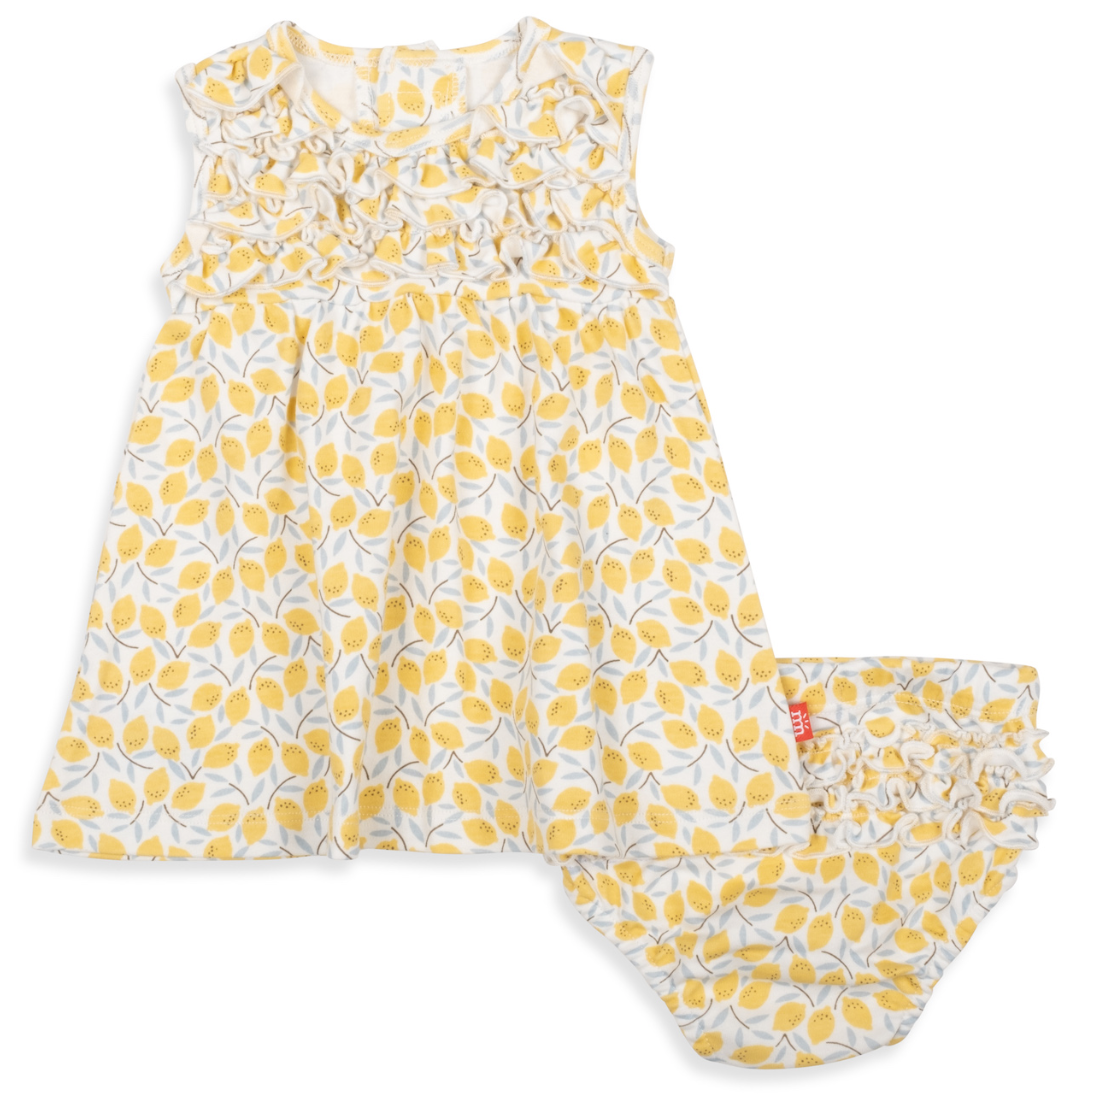 Magnetic Me- Easy Peasy Lemon Squeezy Dress and Diaper Cover